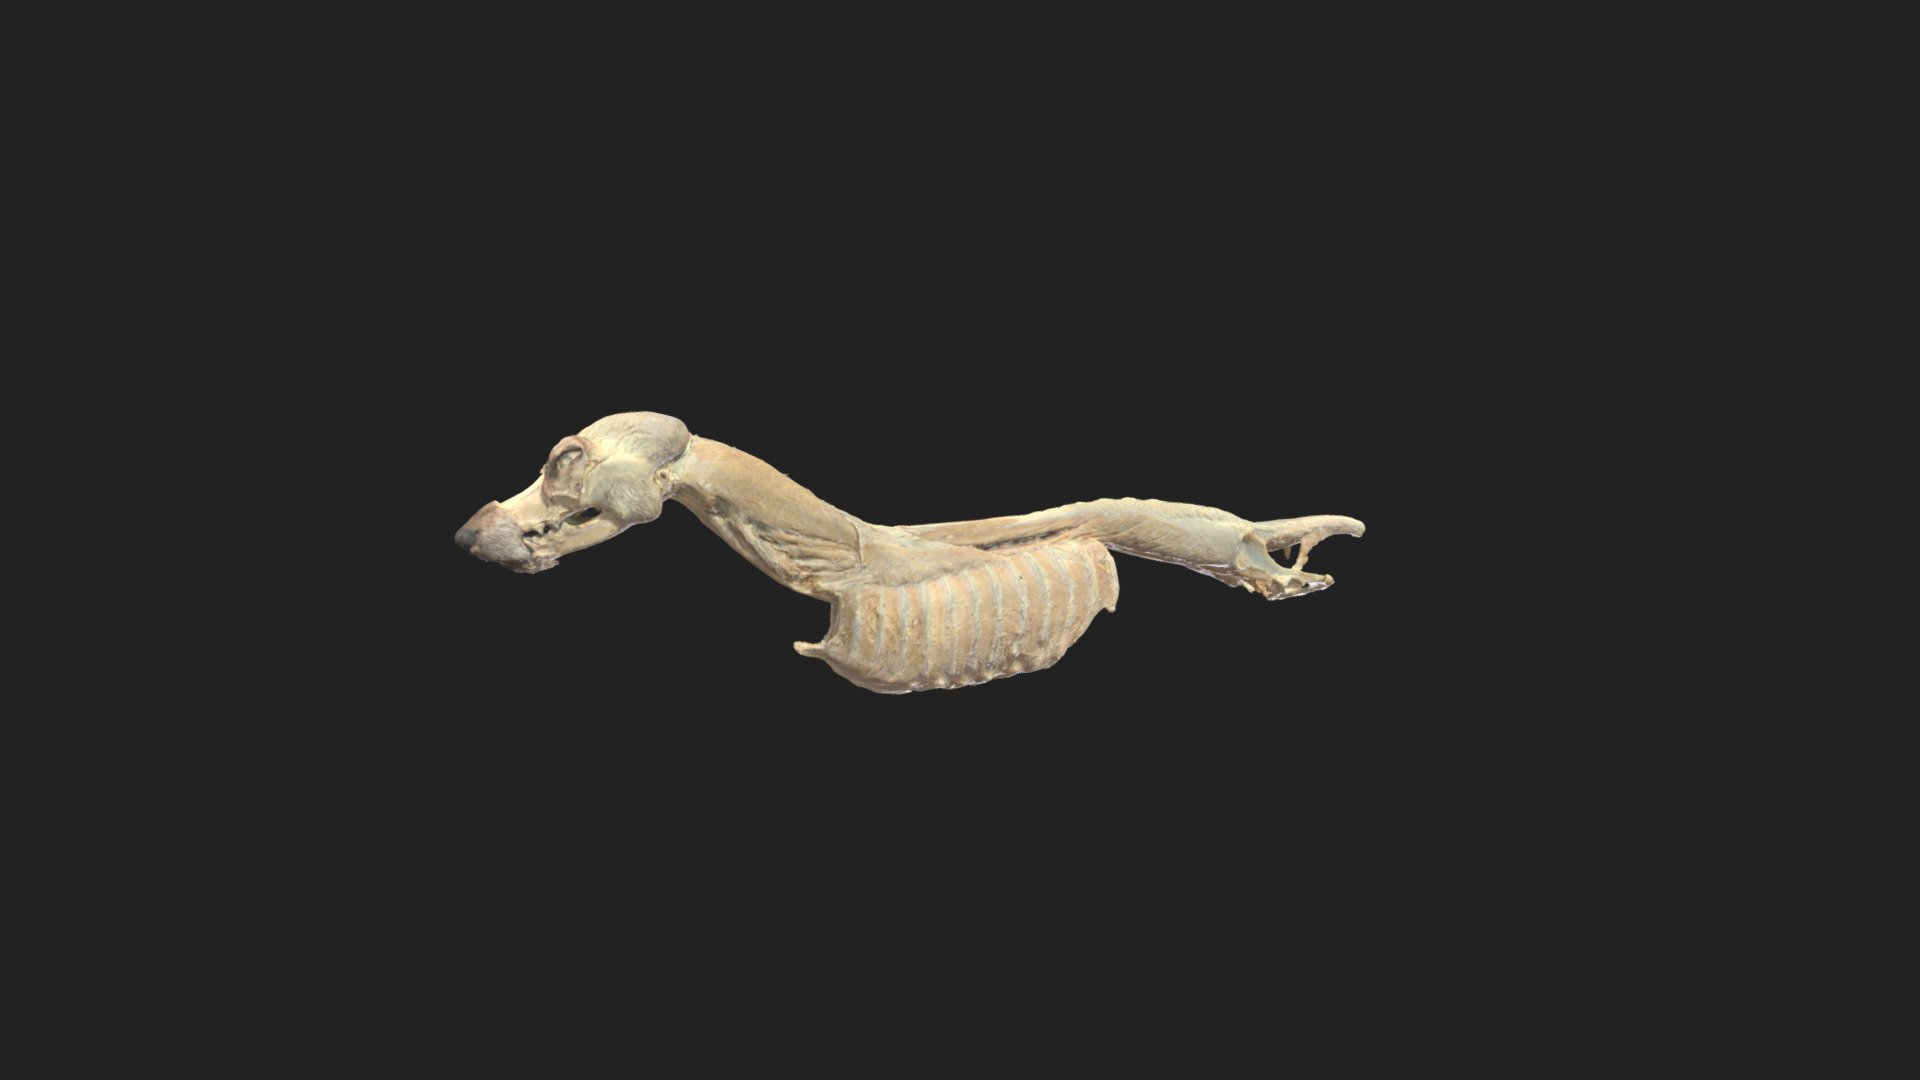 superficial back muscels of a dog 

size of specimen: 687.7 x 120.7 x 114.3 mm

3D scanning performed with the structured light scanners “Artec Leo” and “Artec Space Spider” - superficial back muscels dog - 3D model by vetanatMunich 3d model